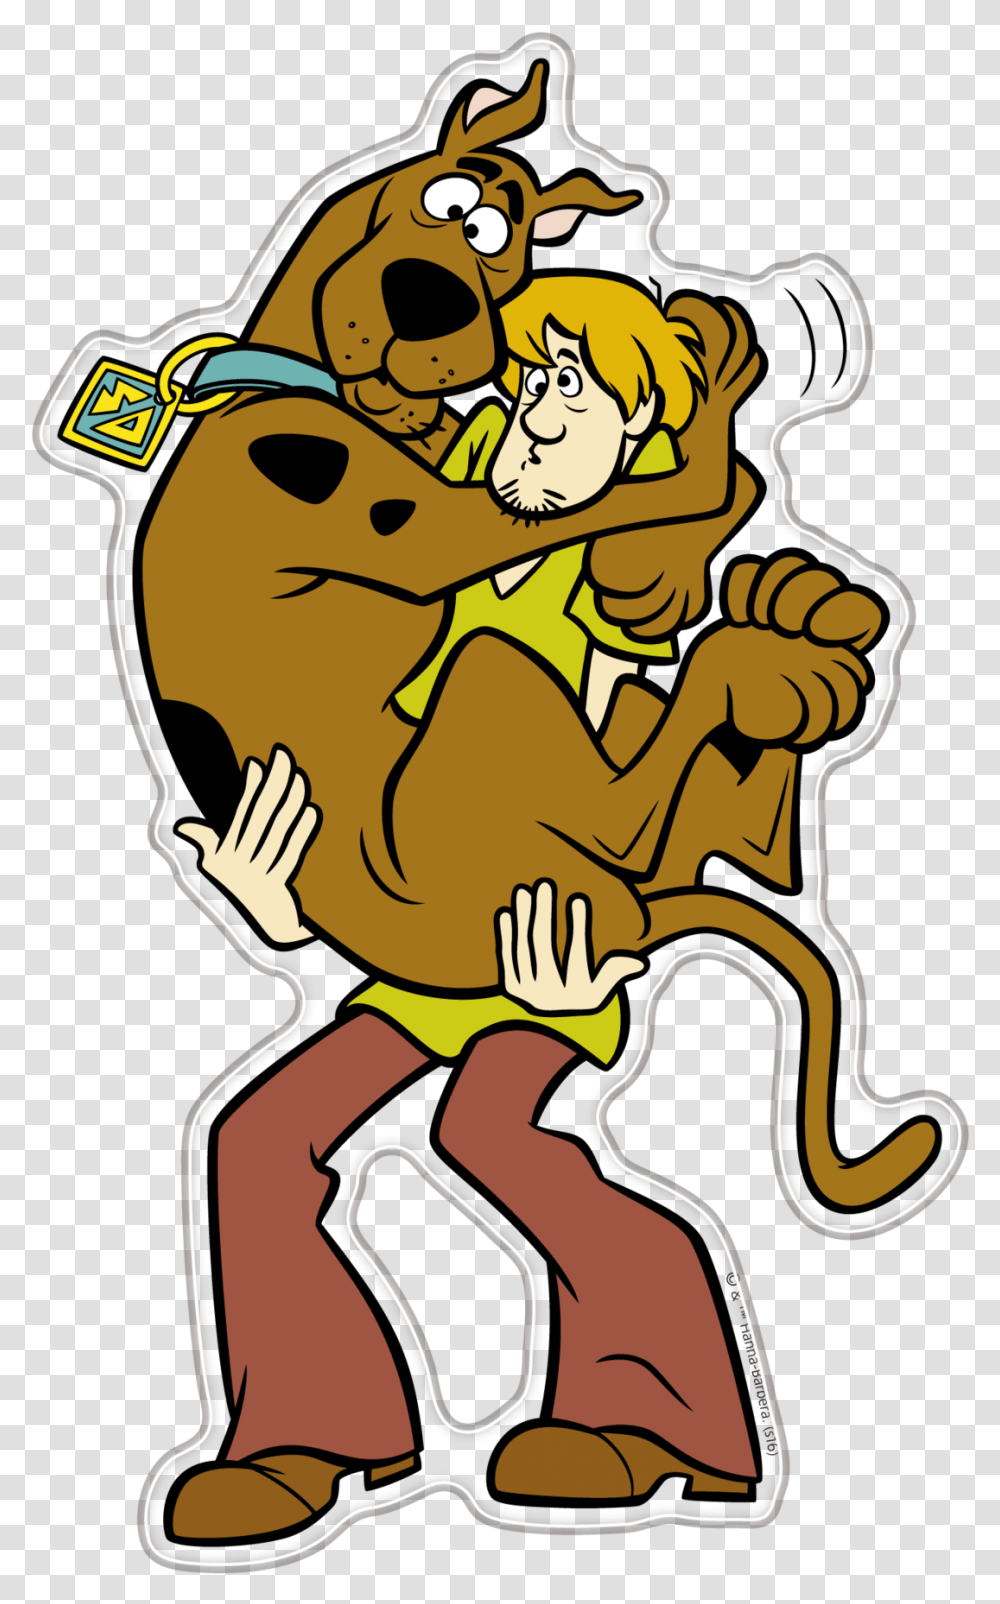 Scared Scooby Doo Shaggy Premium 3d Character Fan Emblem Scooby And Shaggy, Label Transparent Png